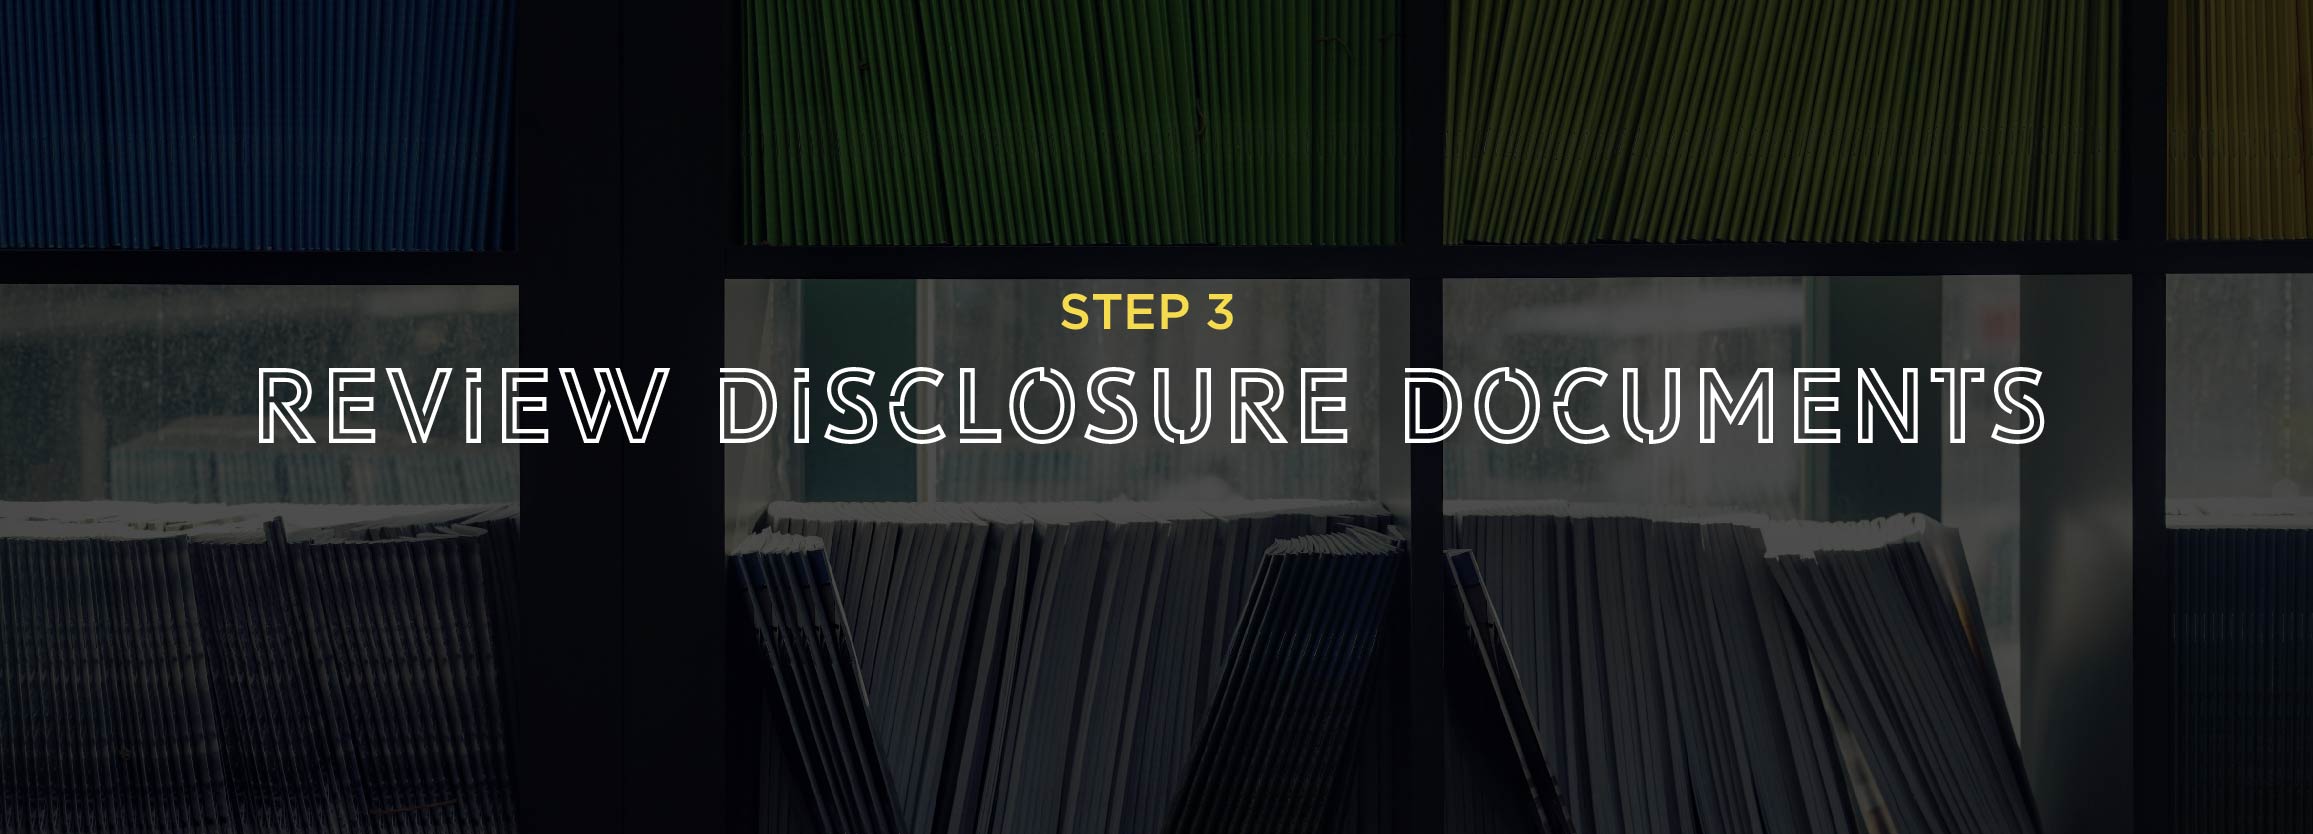 Step 3 - Review disclosure documents